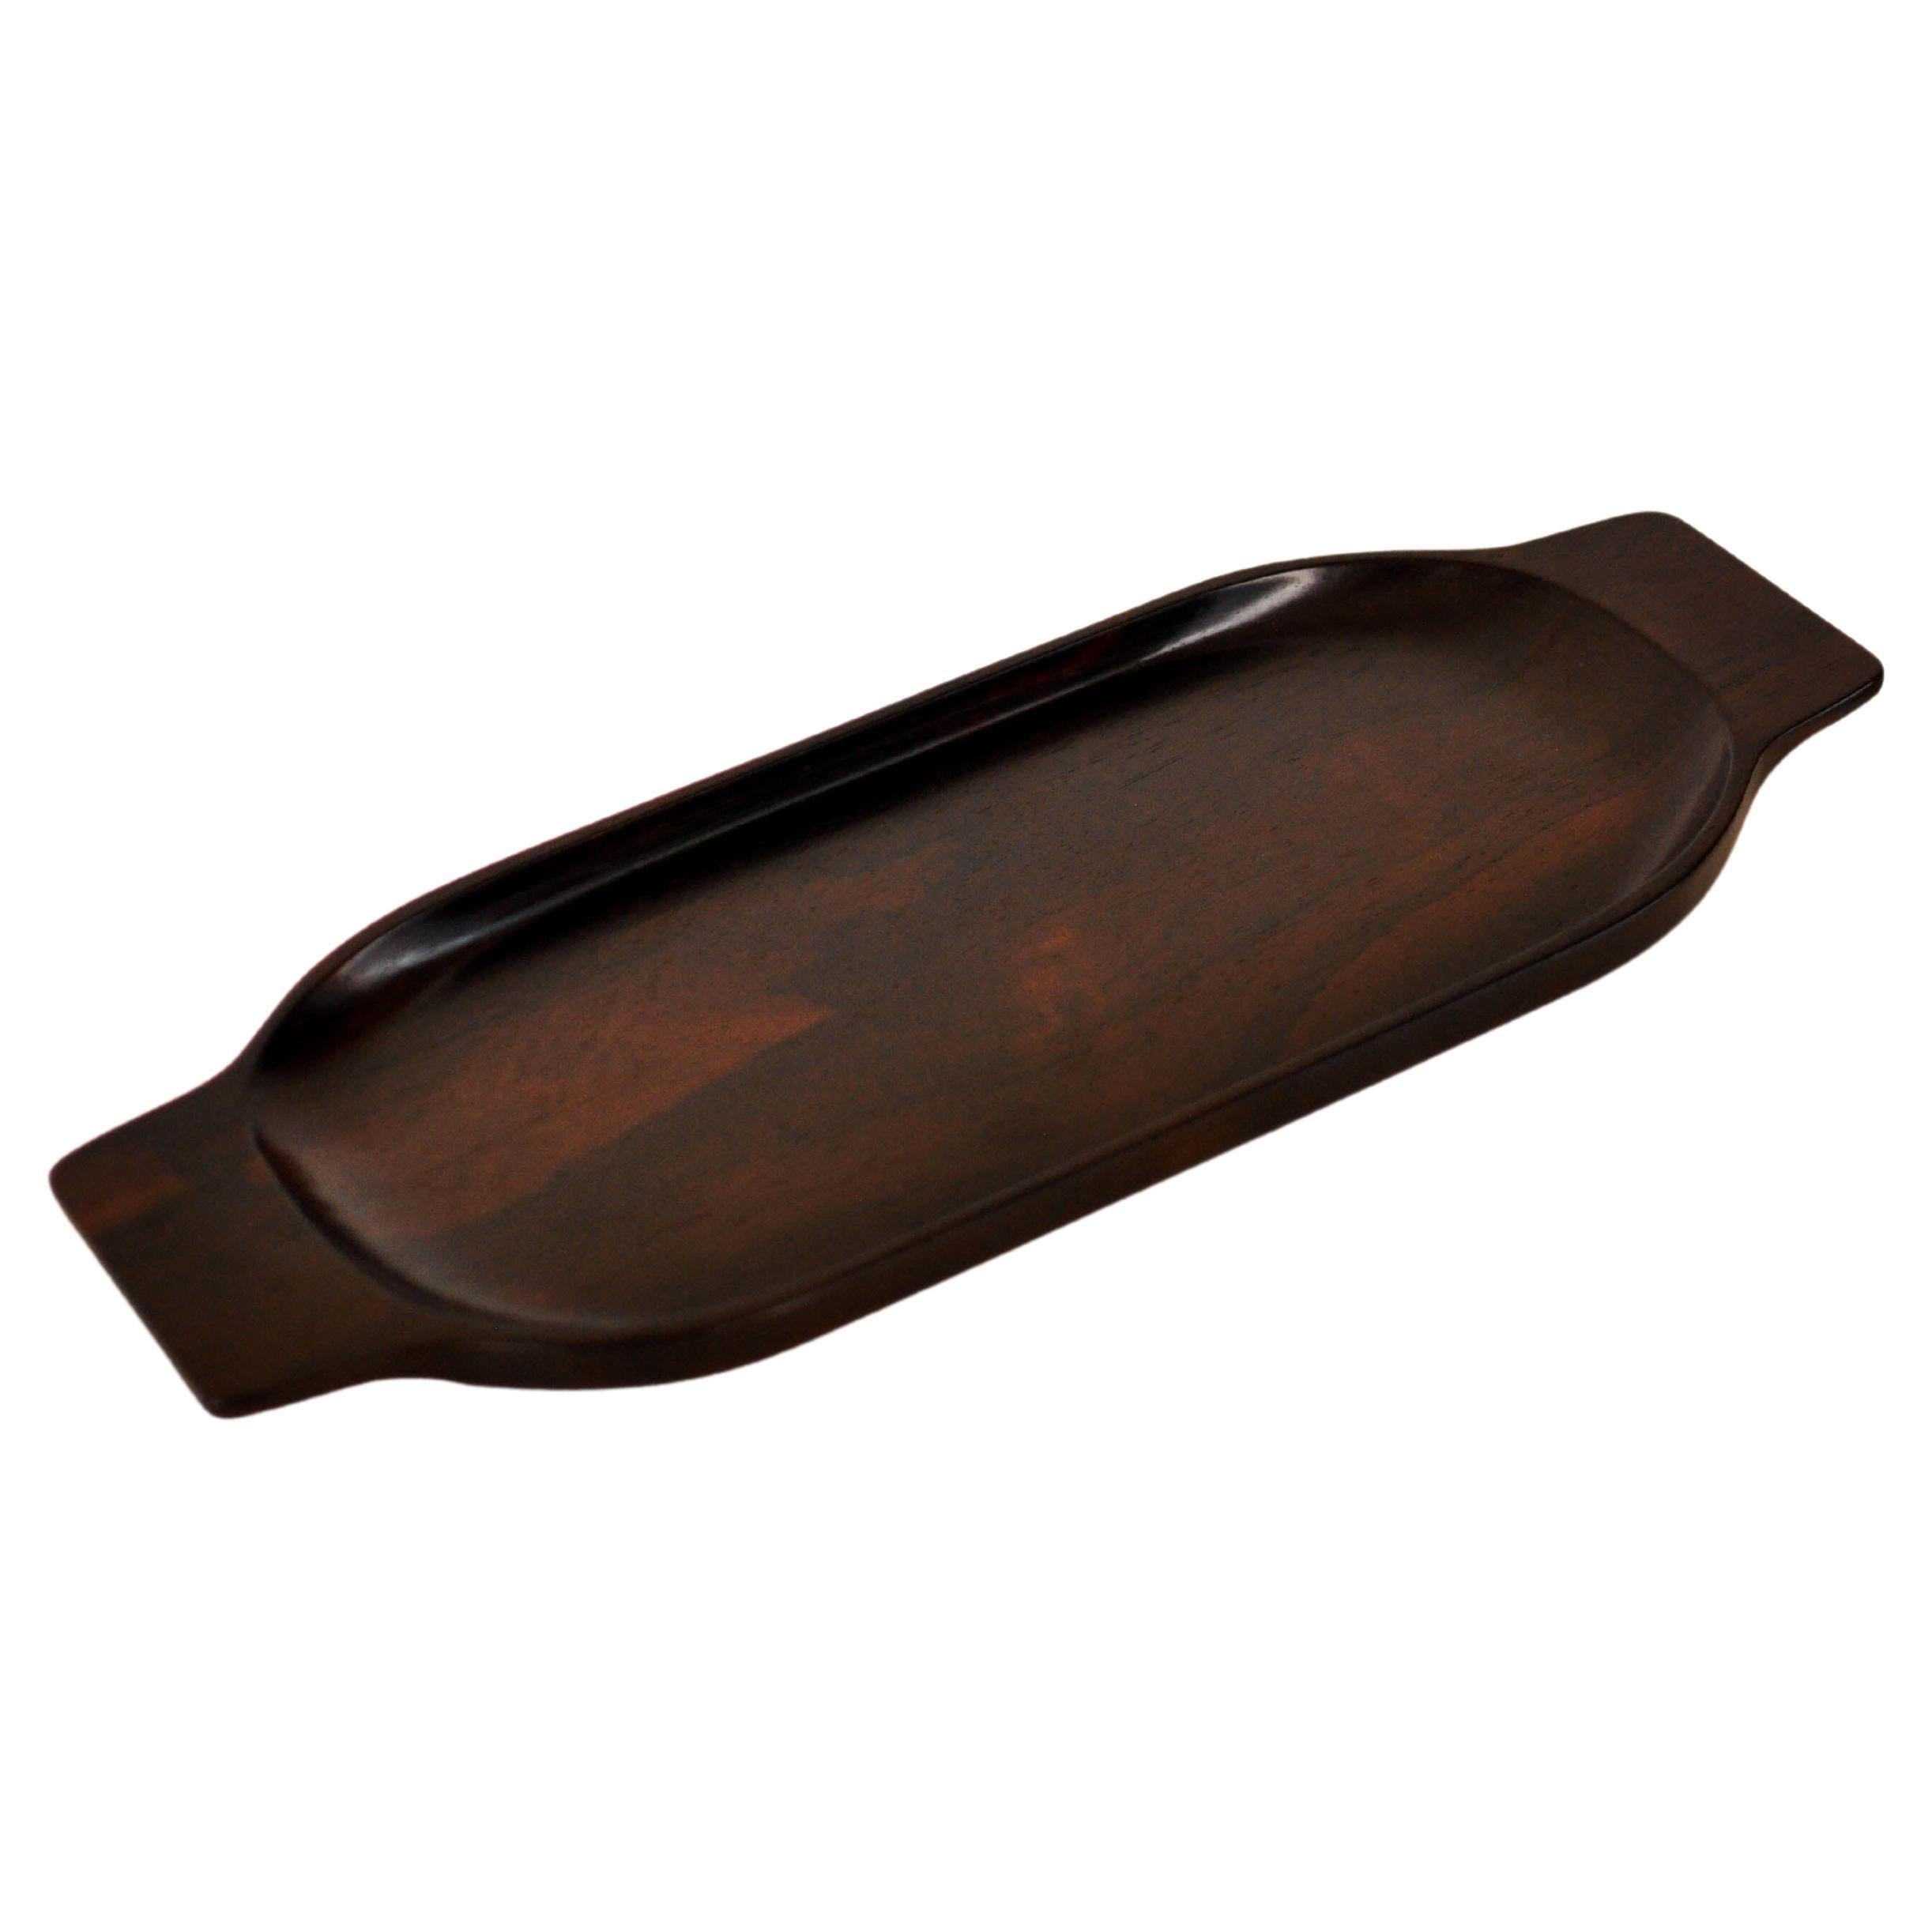 Brazilian Midcentury Serving Tray in Rosewood by Casa Finland, c. 1970